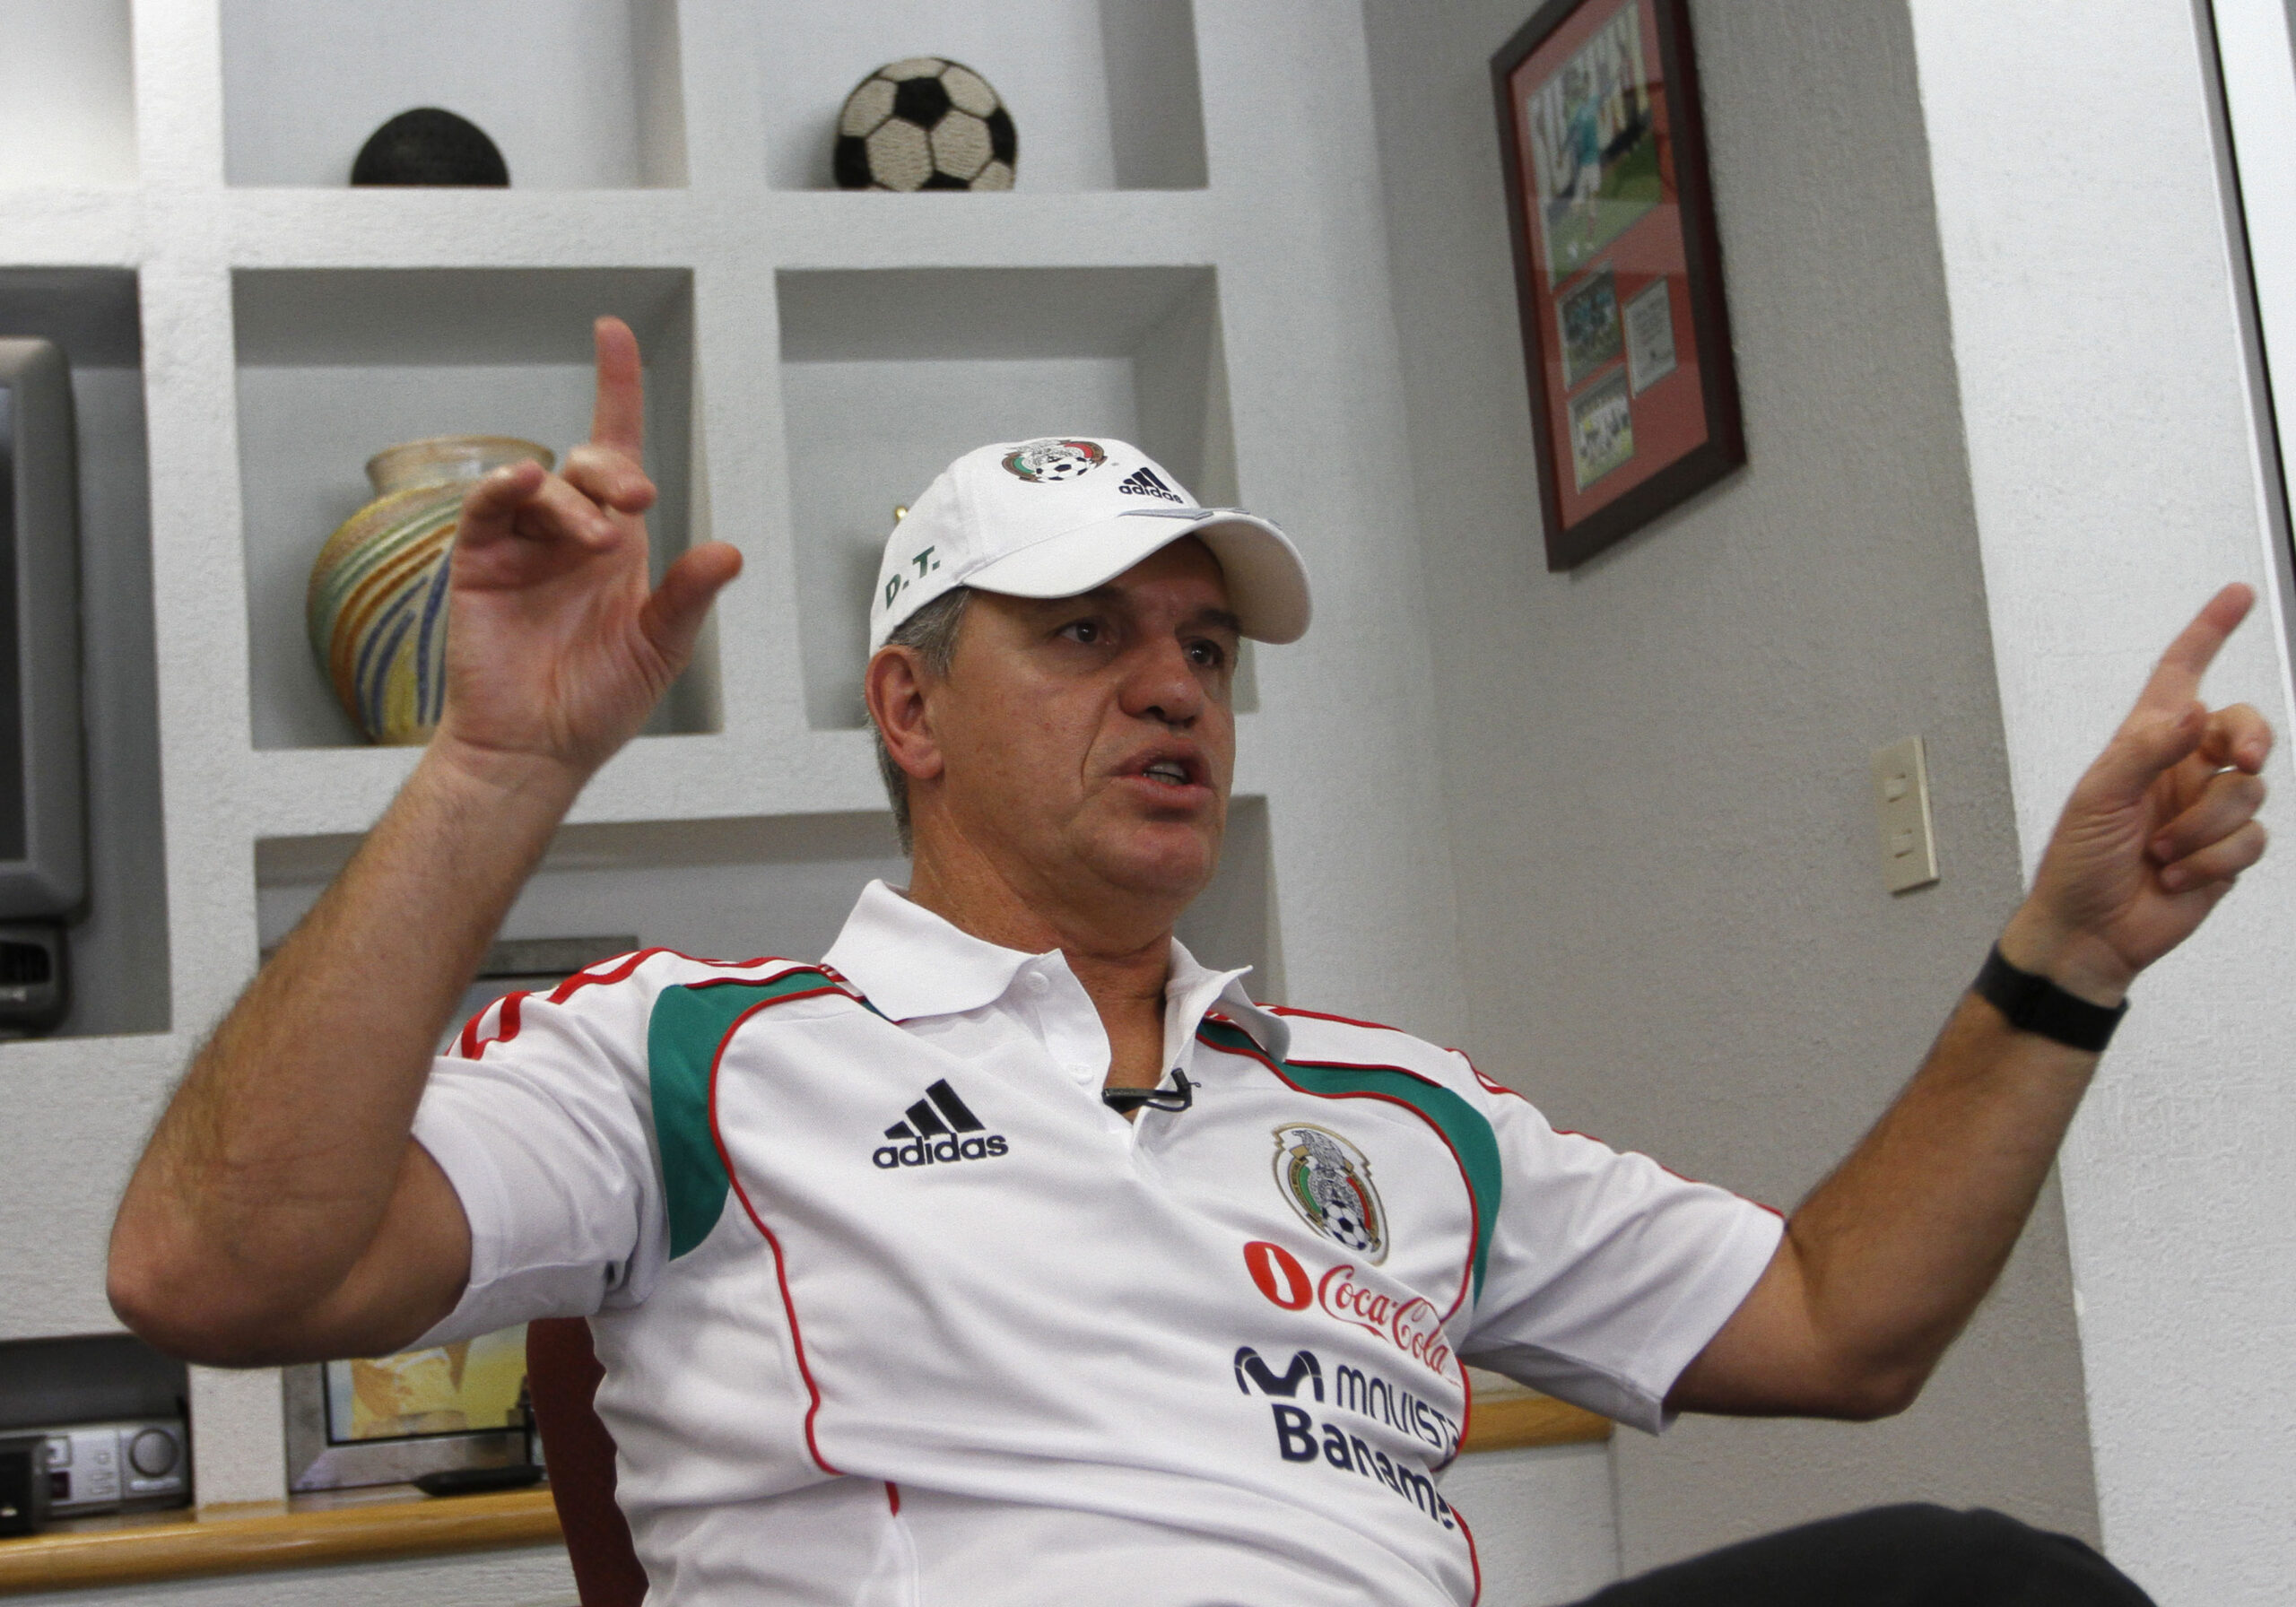 javier-aguirre,-closer-than-ever-to-the-tricolor,-either-as-advisor-or-assistant-to-jaime-lozano